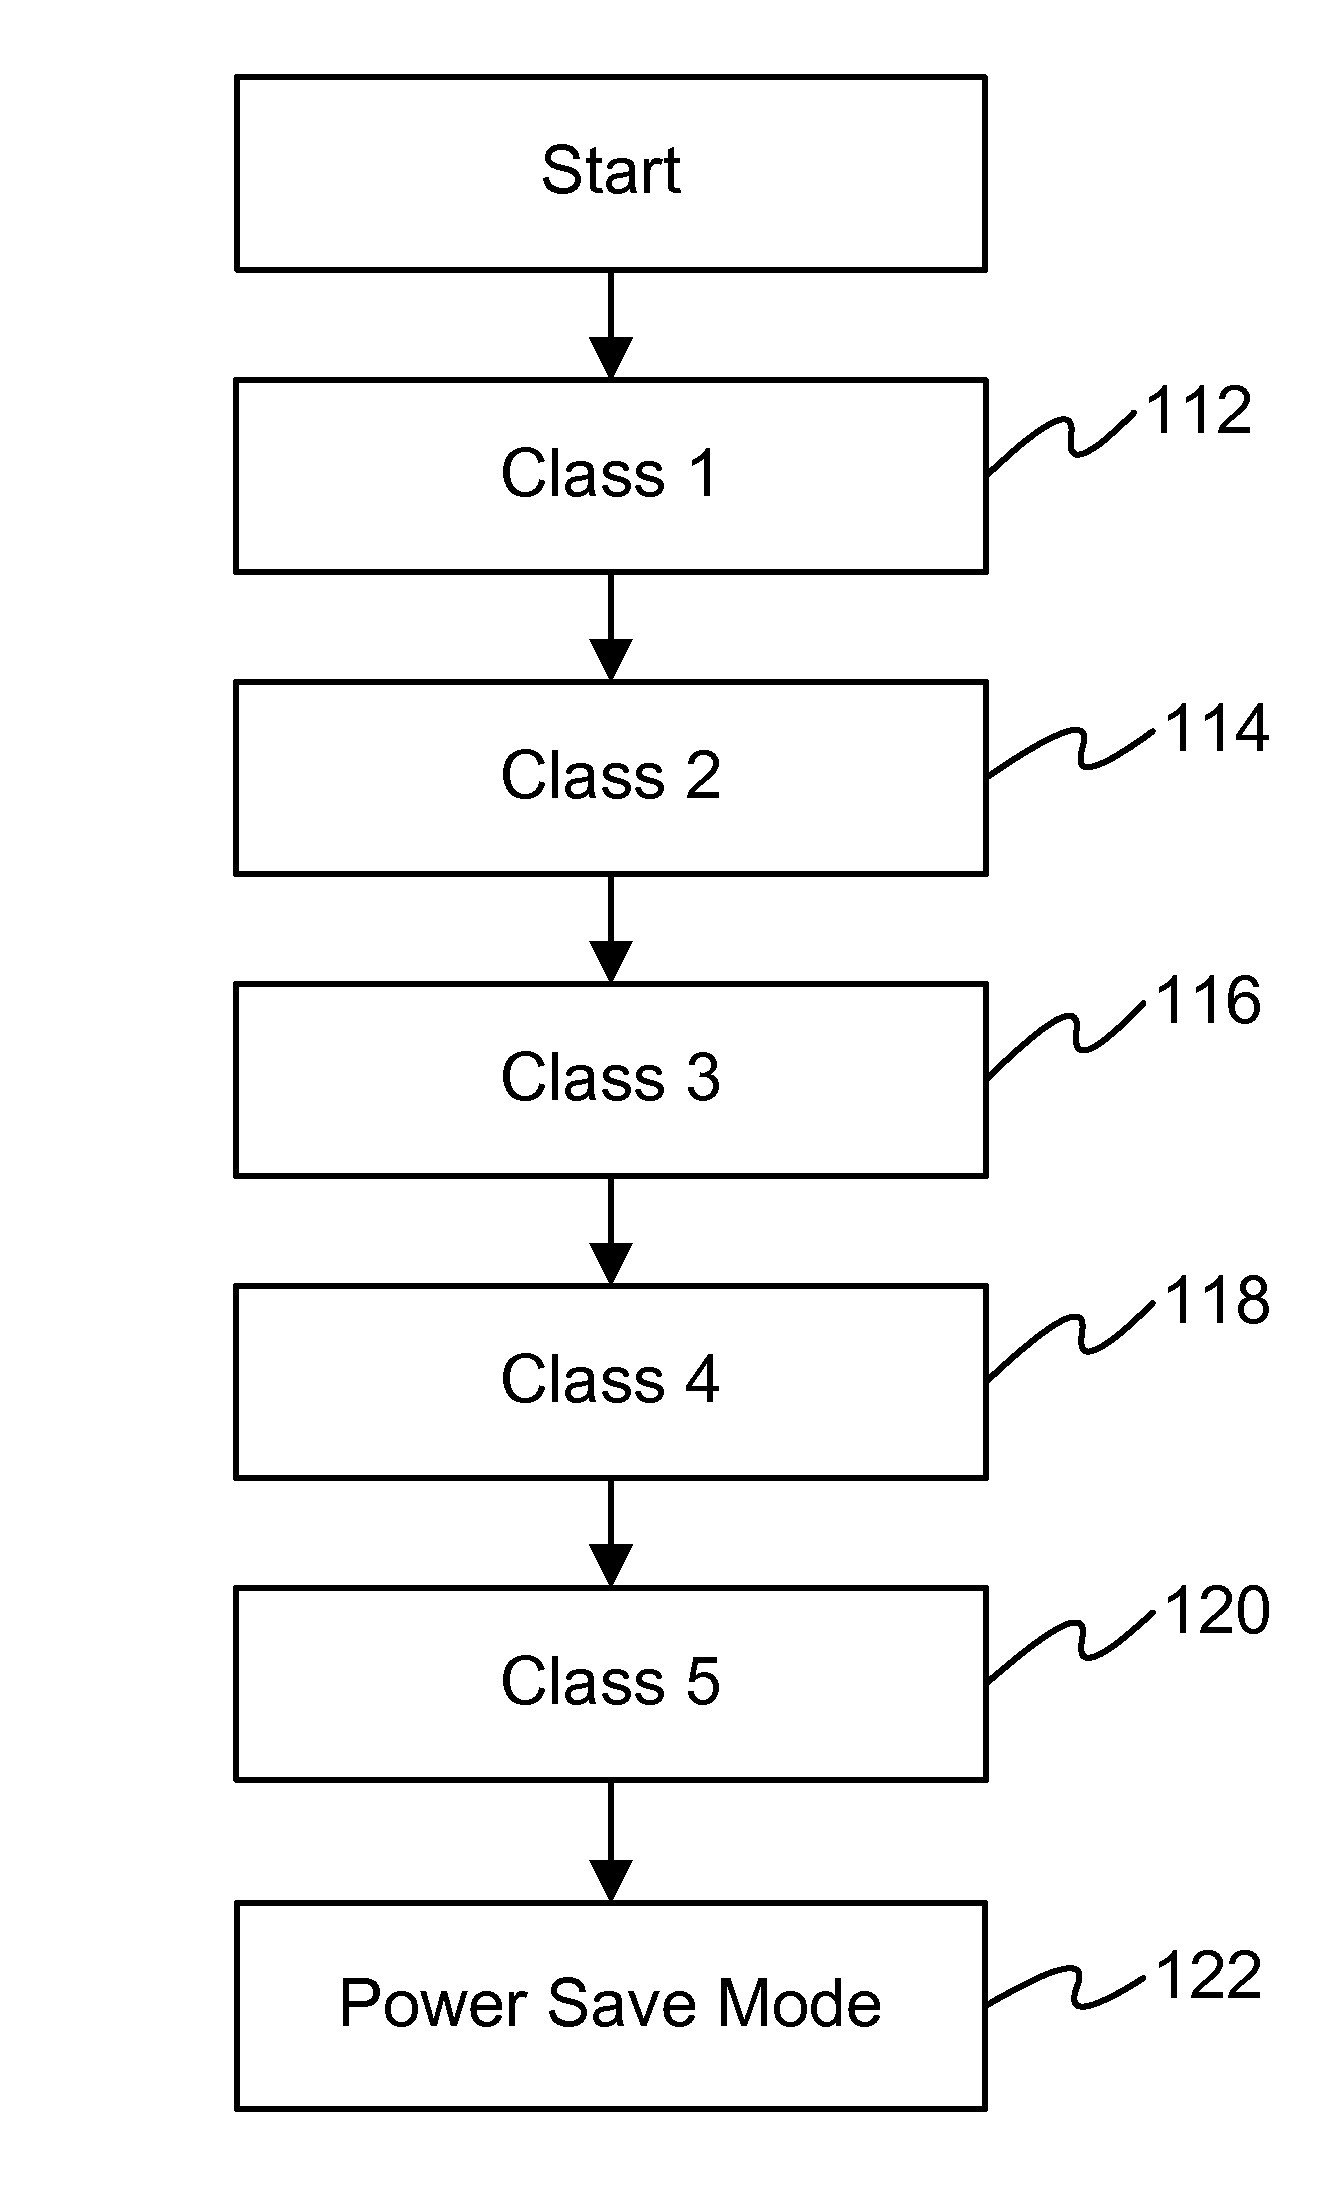 Storage system and method for saving energy based on storage classes with corresponding power saving policies